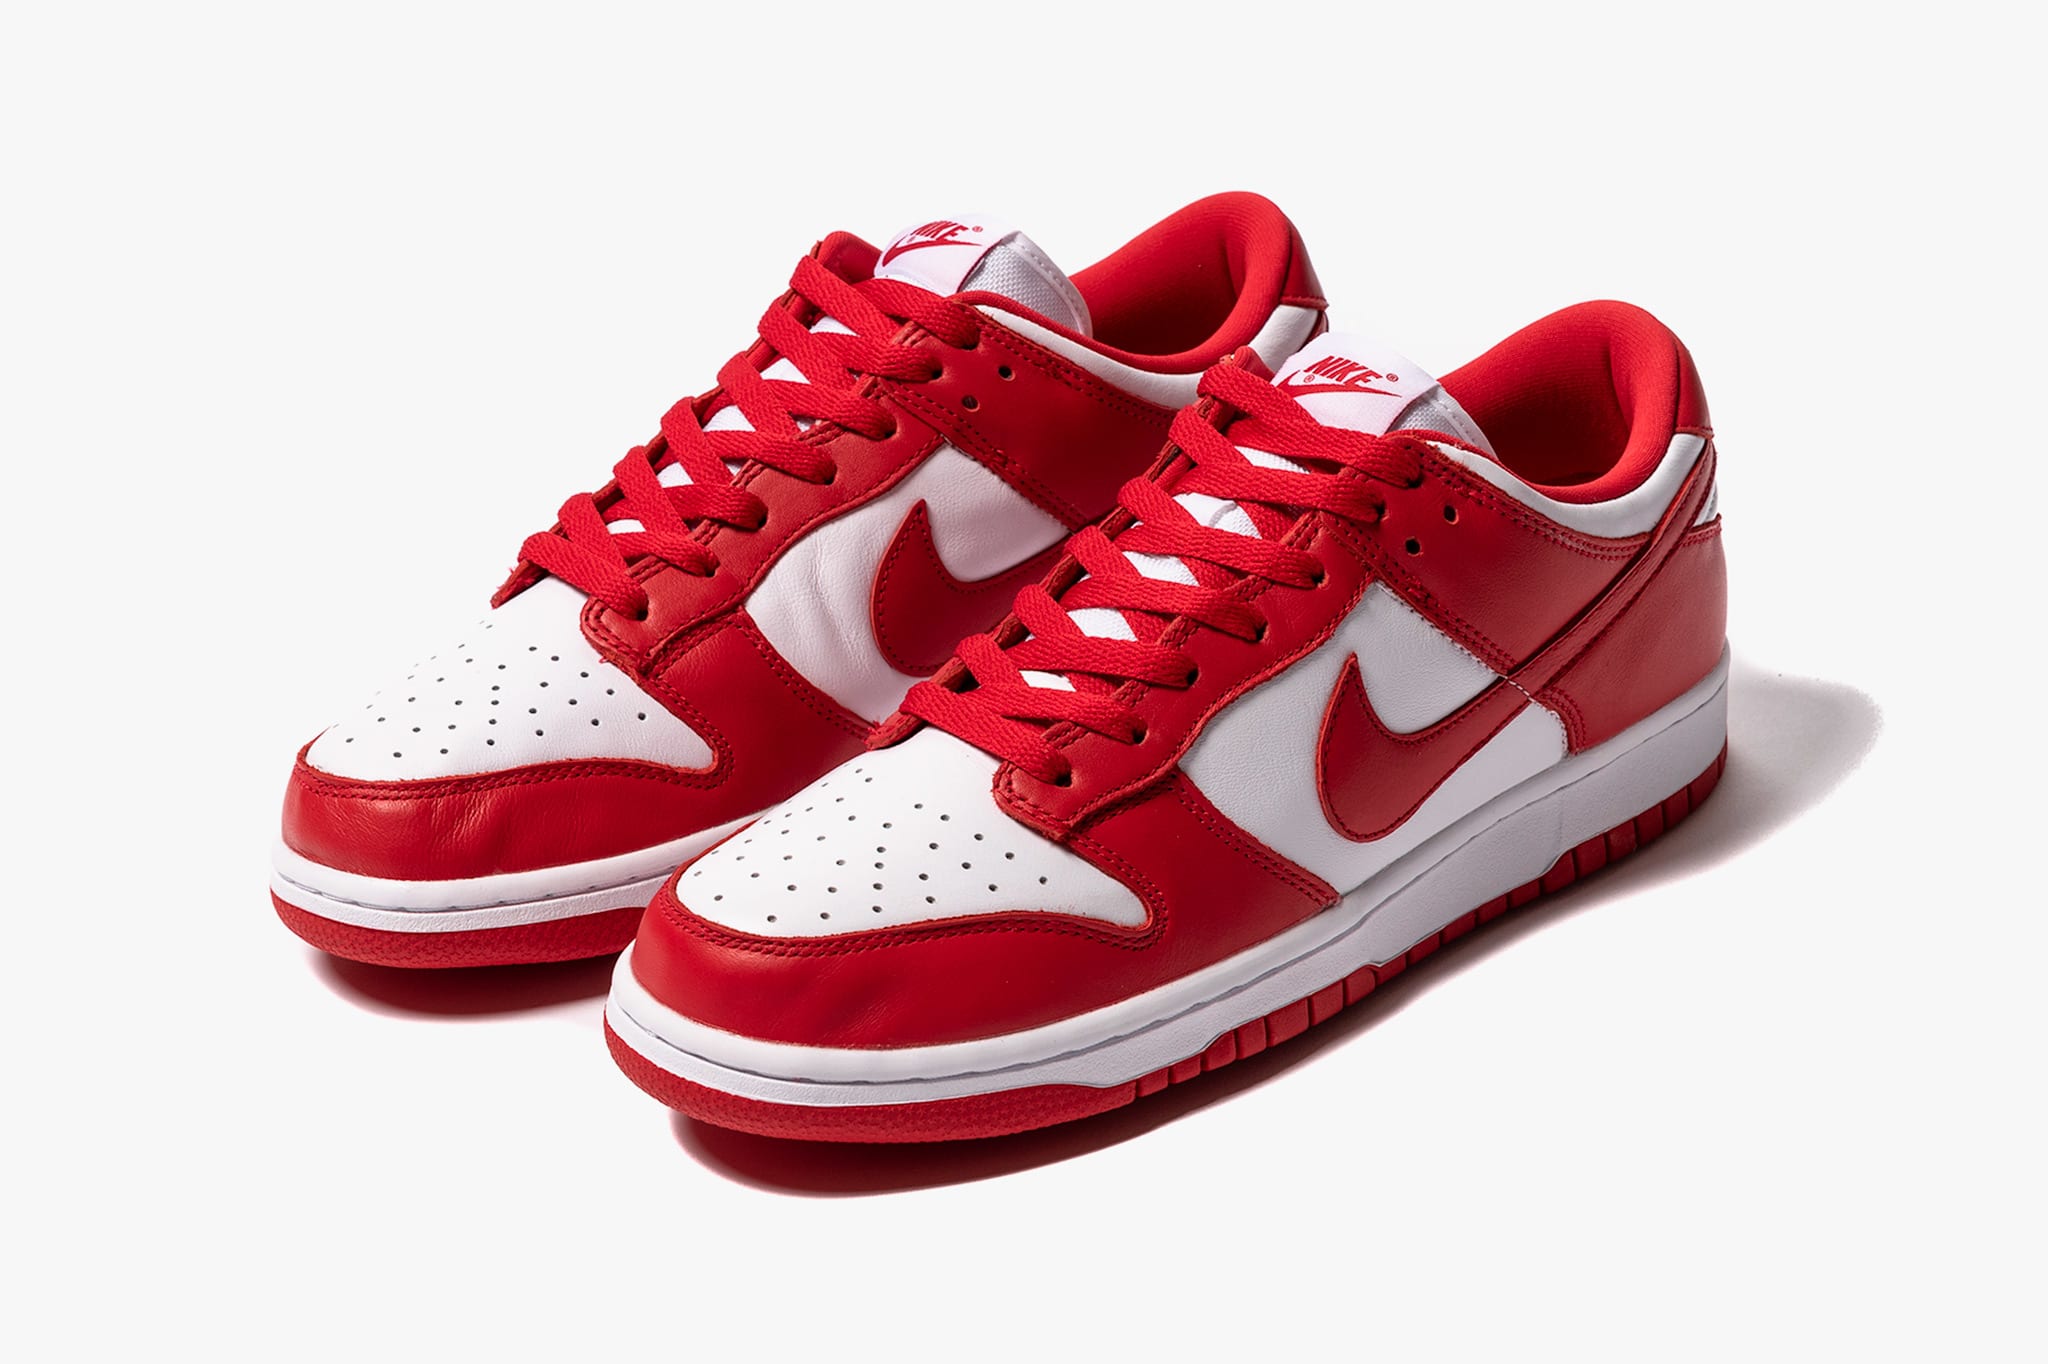 Nike Dunk Low SP “St. Johns” | Release Date: 07.01.20 | HAVEN